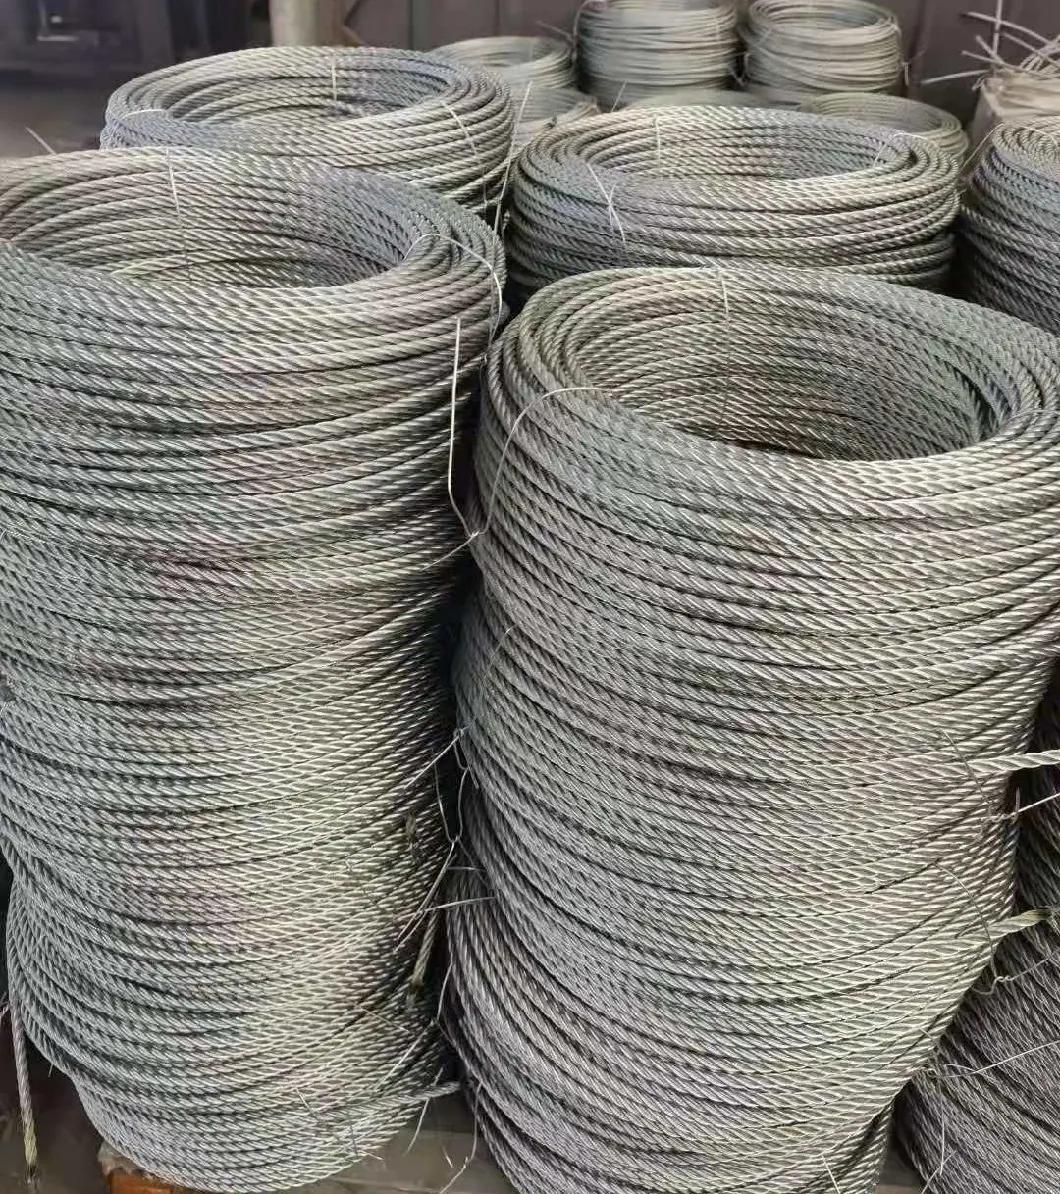 19mm to 25mm 6X25fi Steel Wire Rope Mesh Manufacturer